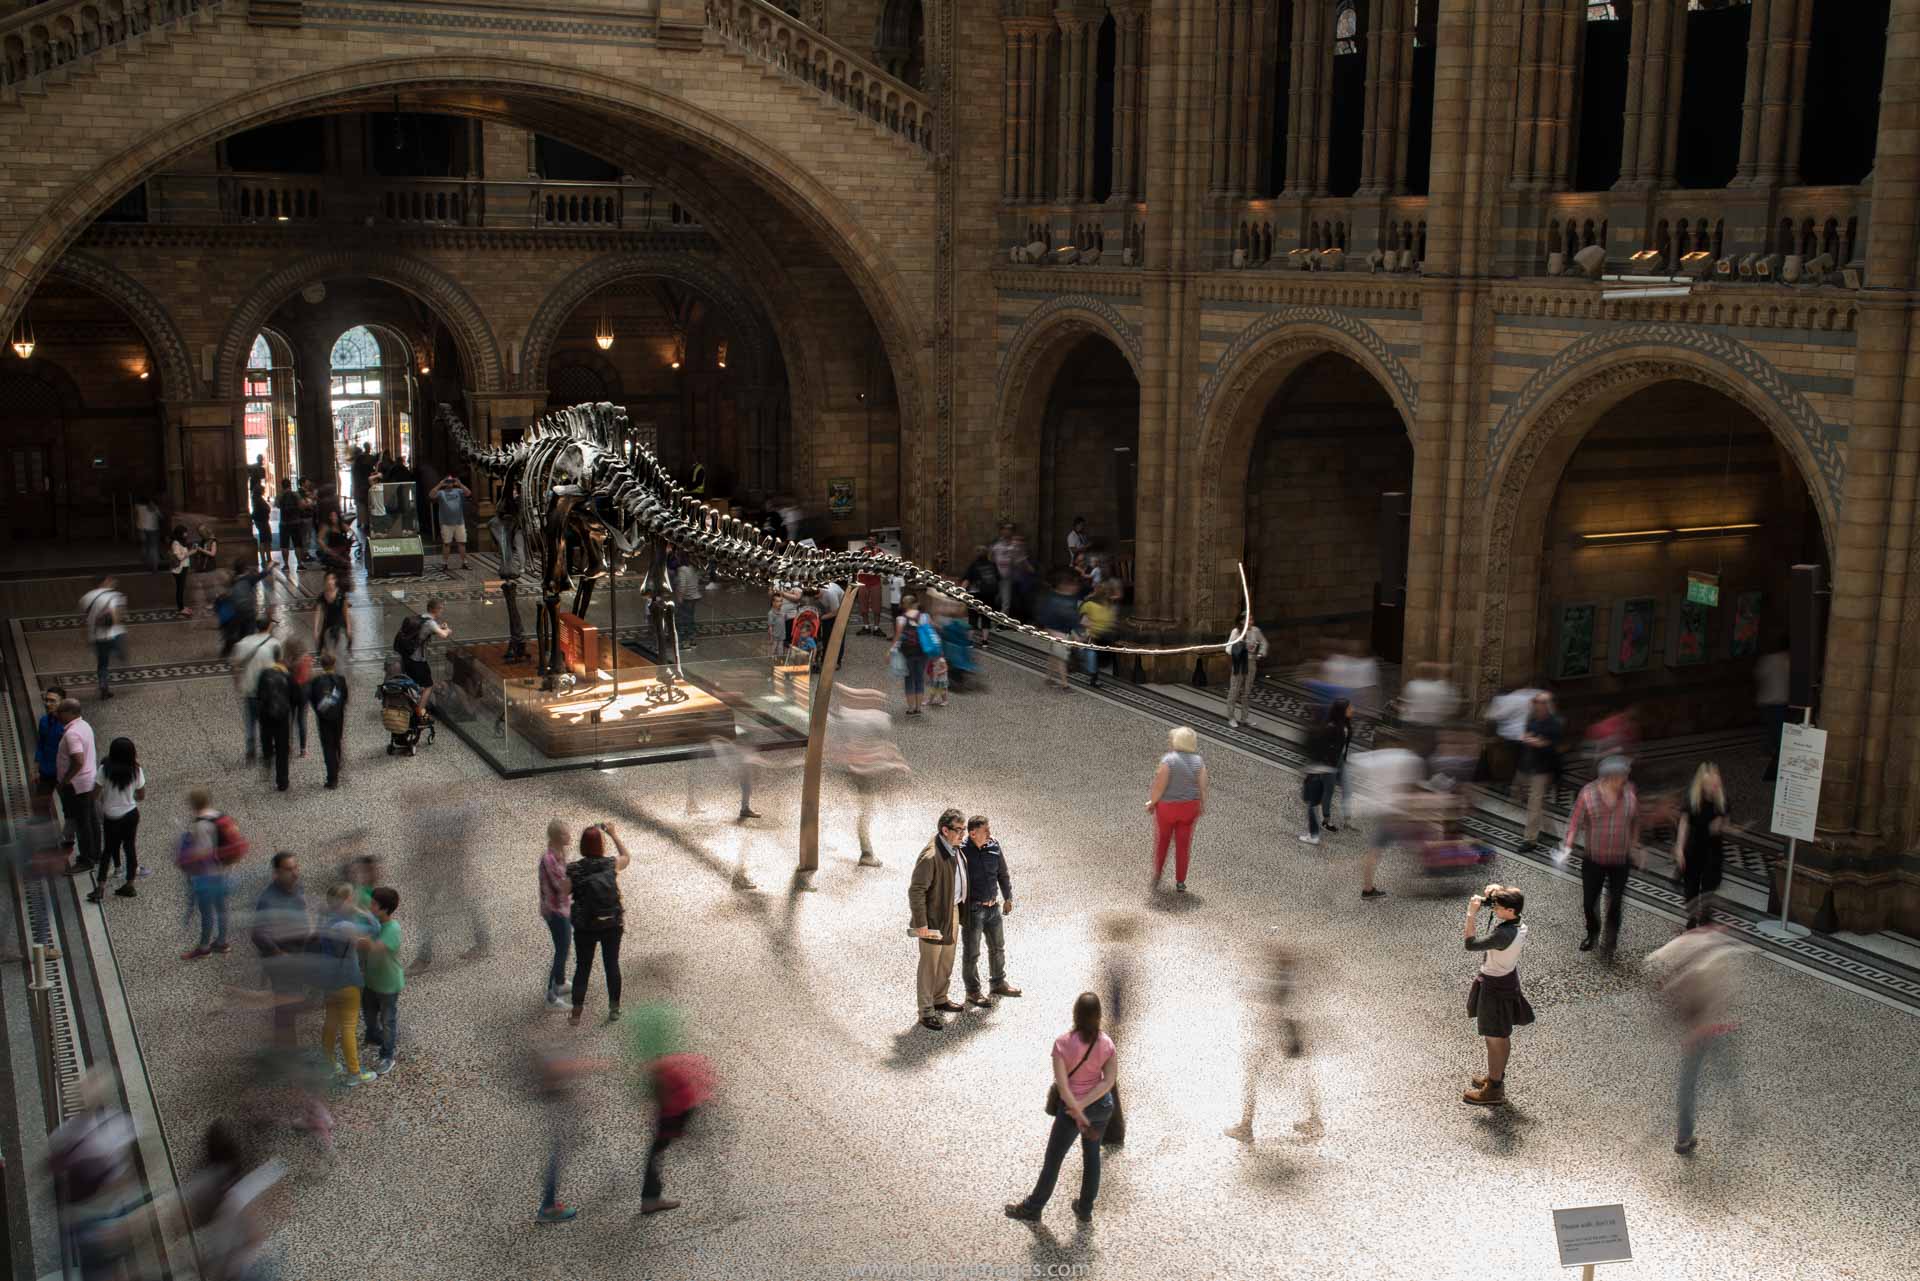 dinosaur's picture, visit in National History Museum